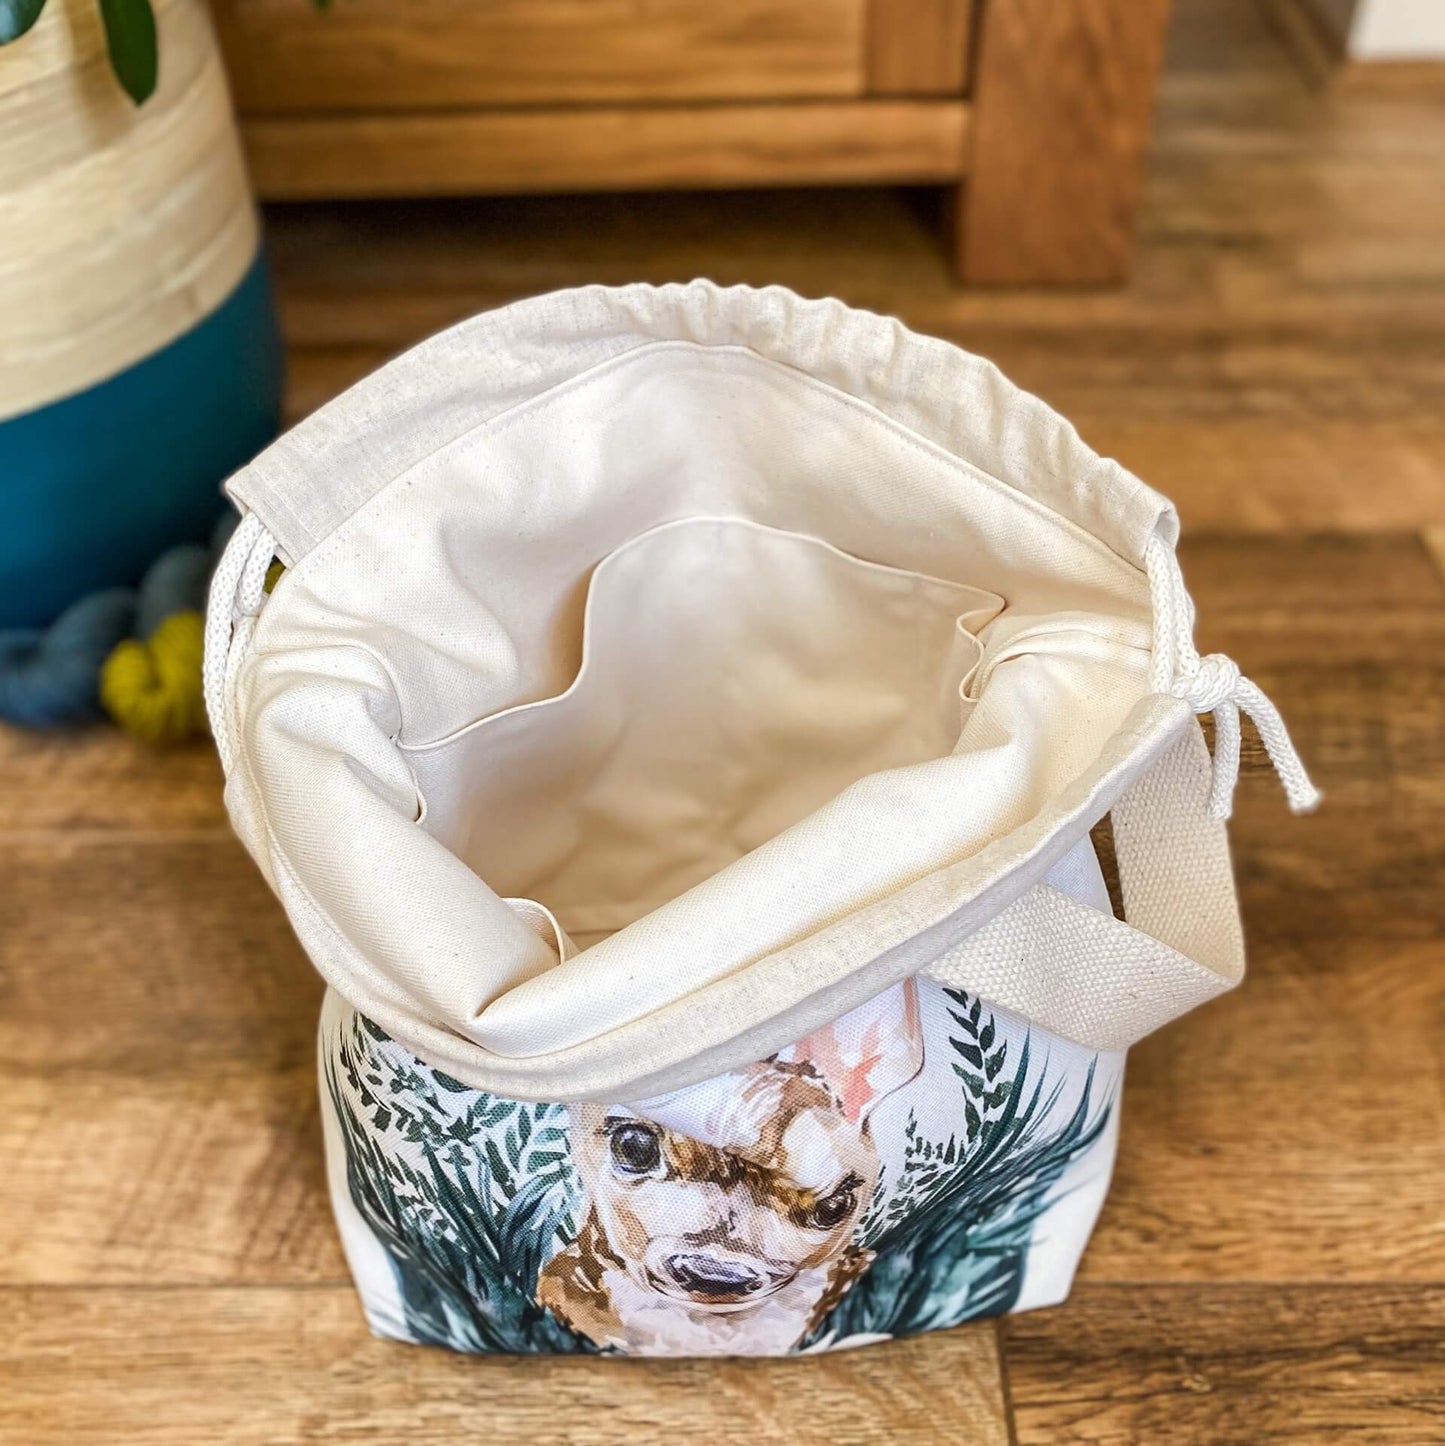 A project bag for knitting is sitting on a wooden floor. It is wide open to show the inside lining and pockets. Behind the bag can be seen two skeins of yarn and a houseplant. 